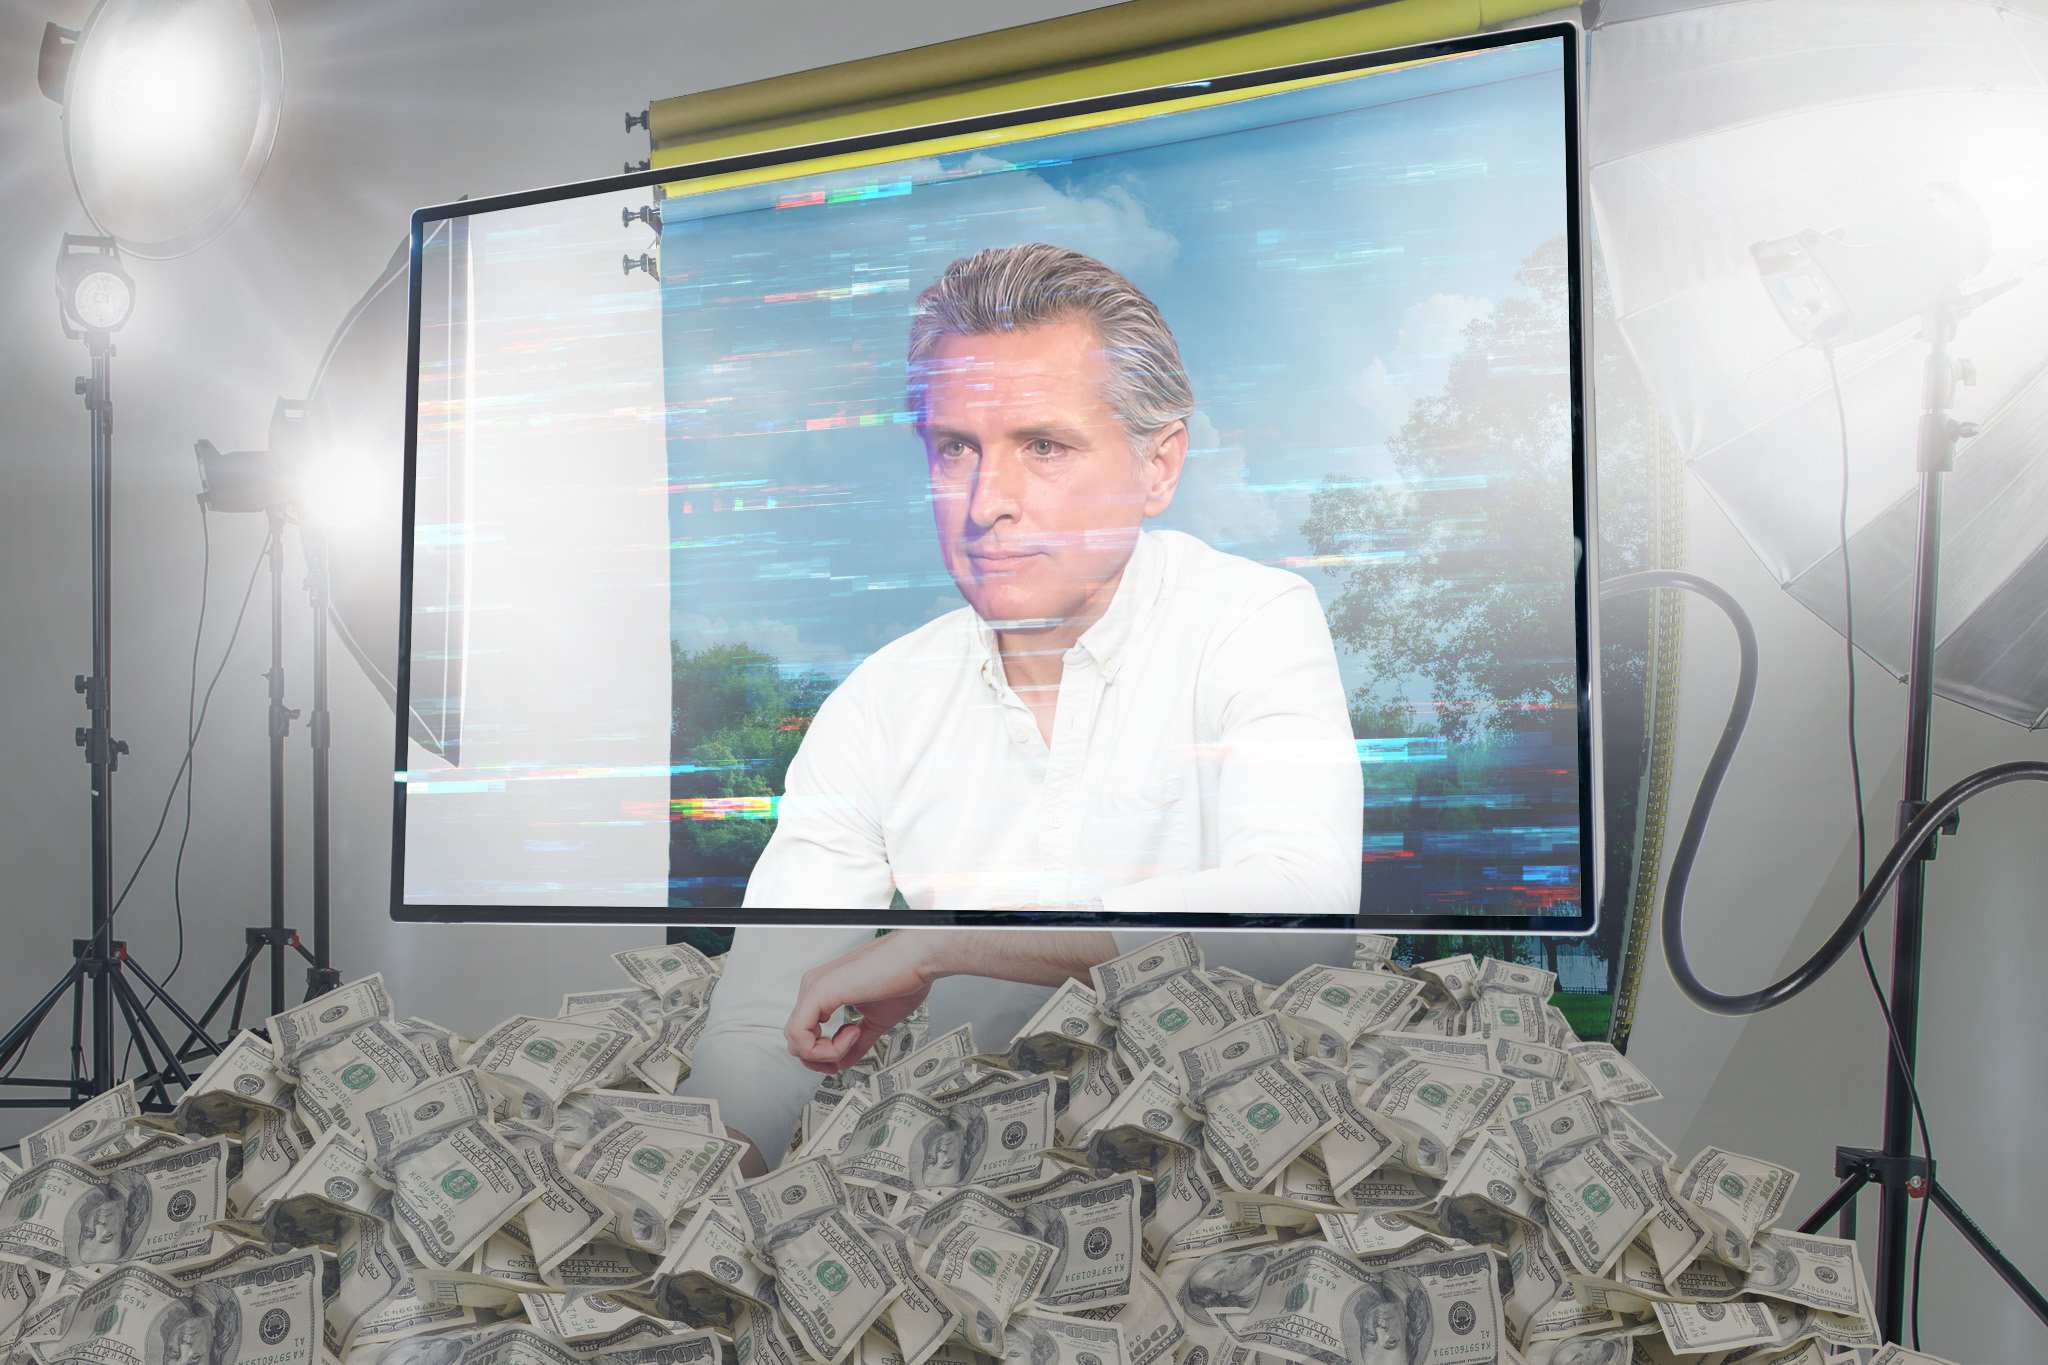 California Gov. Gavin Newsom is seen on a TV screen in a studio, with lighting equipment around and a pile of money in the foreground.